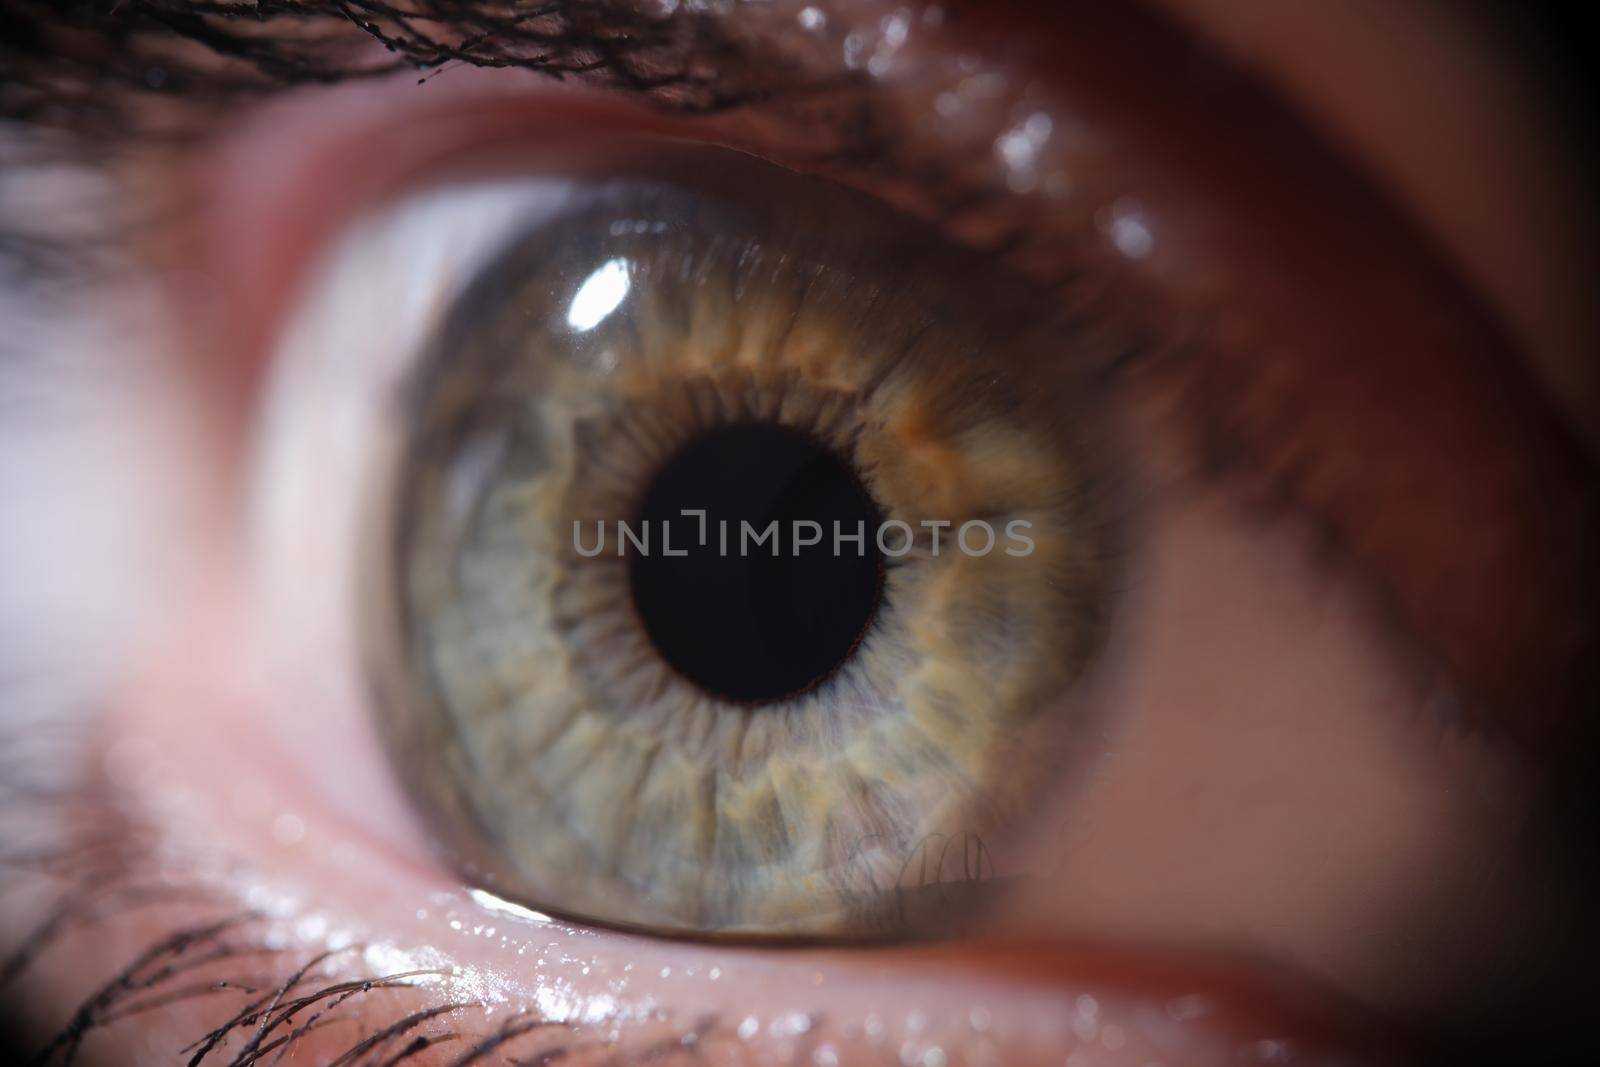 Female gray green pupil with eyelashes. Laser vision correction concept